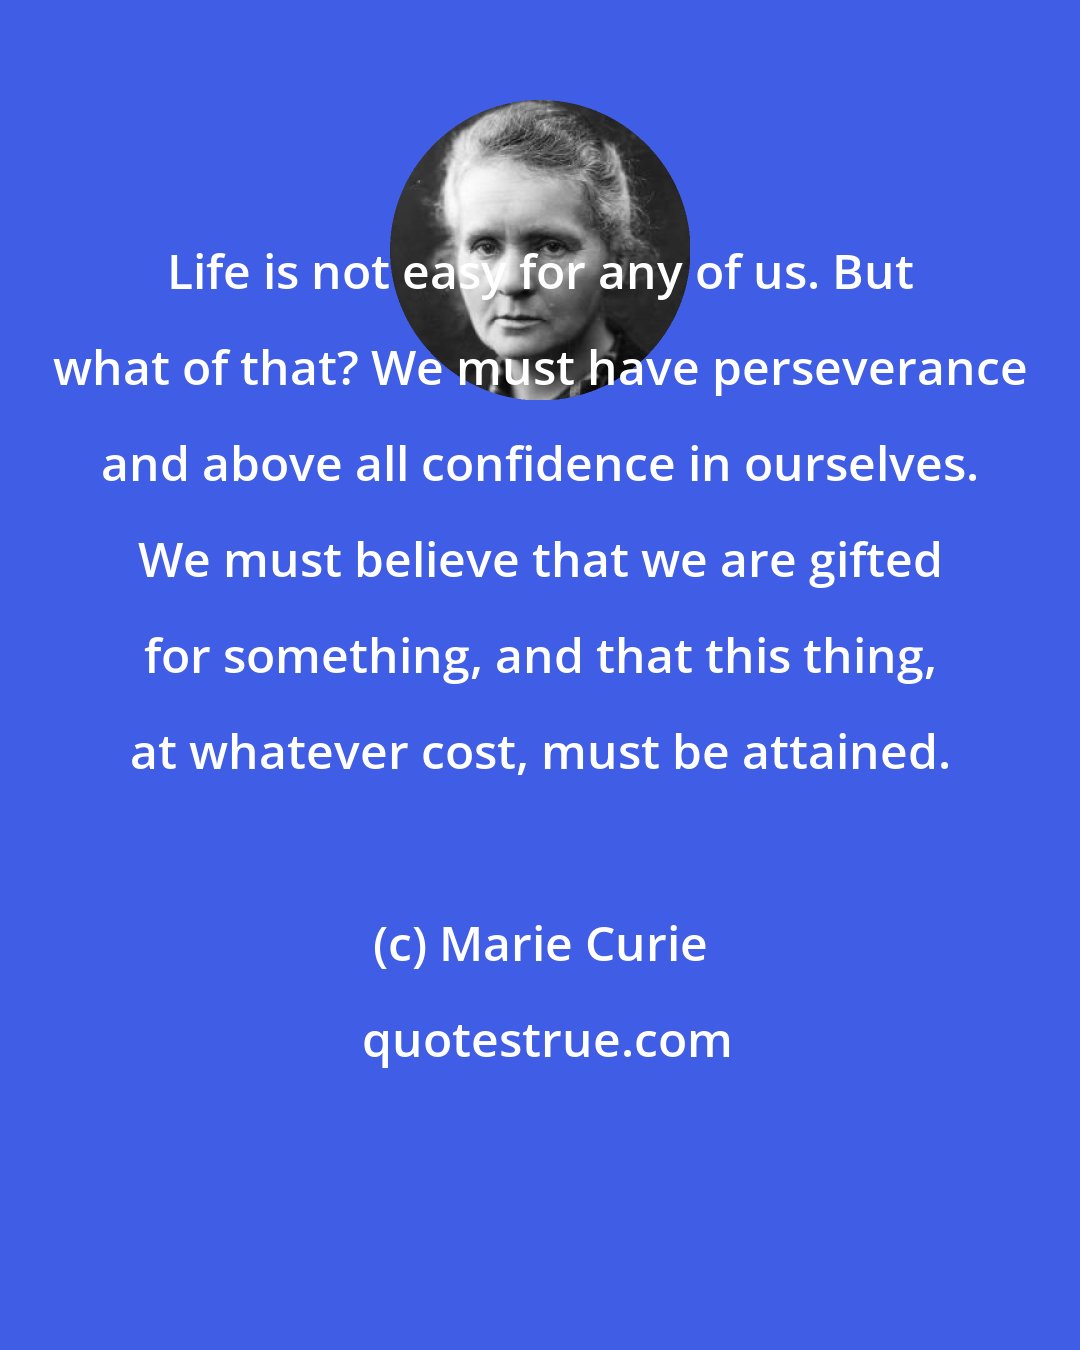 Marie Curie: Life is not easy for any of us. But what of that? We must have perseverance and above all confidence in ourselves. We must believe that we are gifted for something, and that this thing, at whatever cost, must be attained.